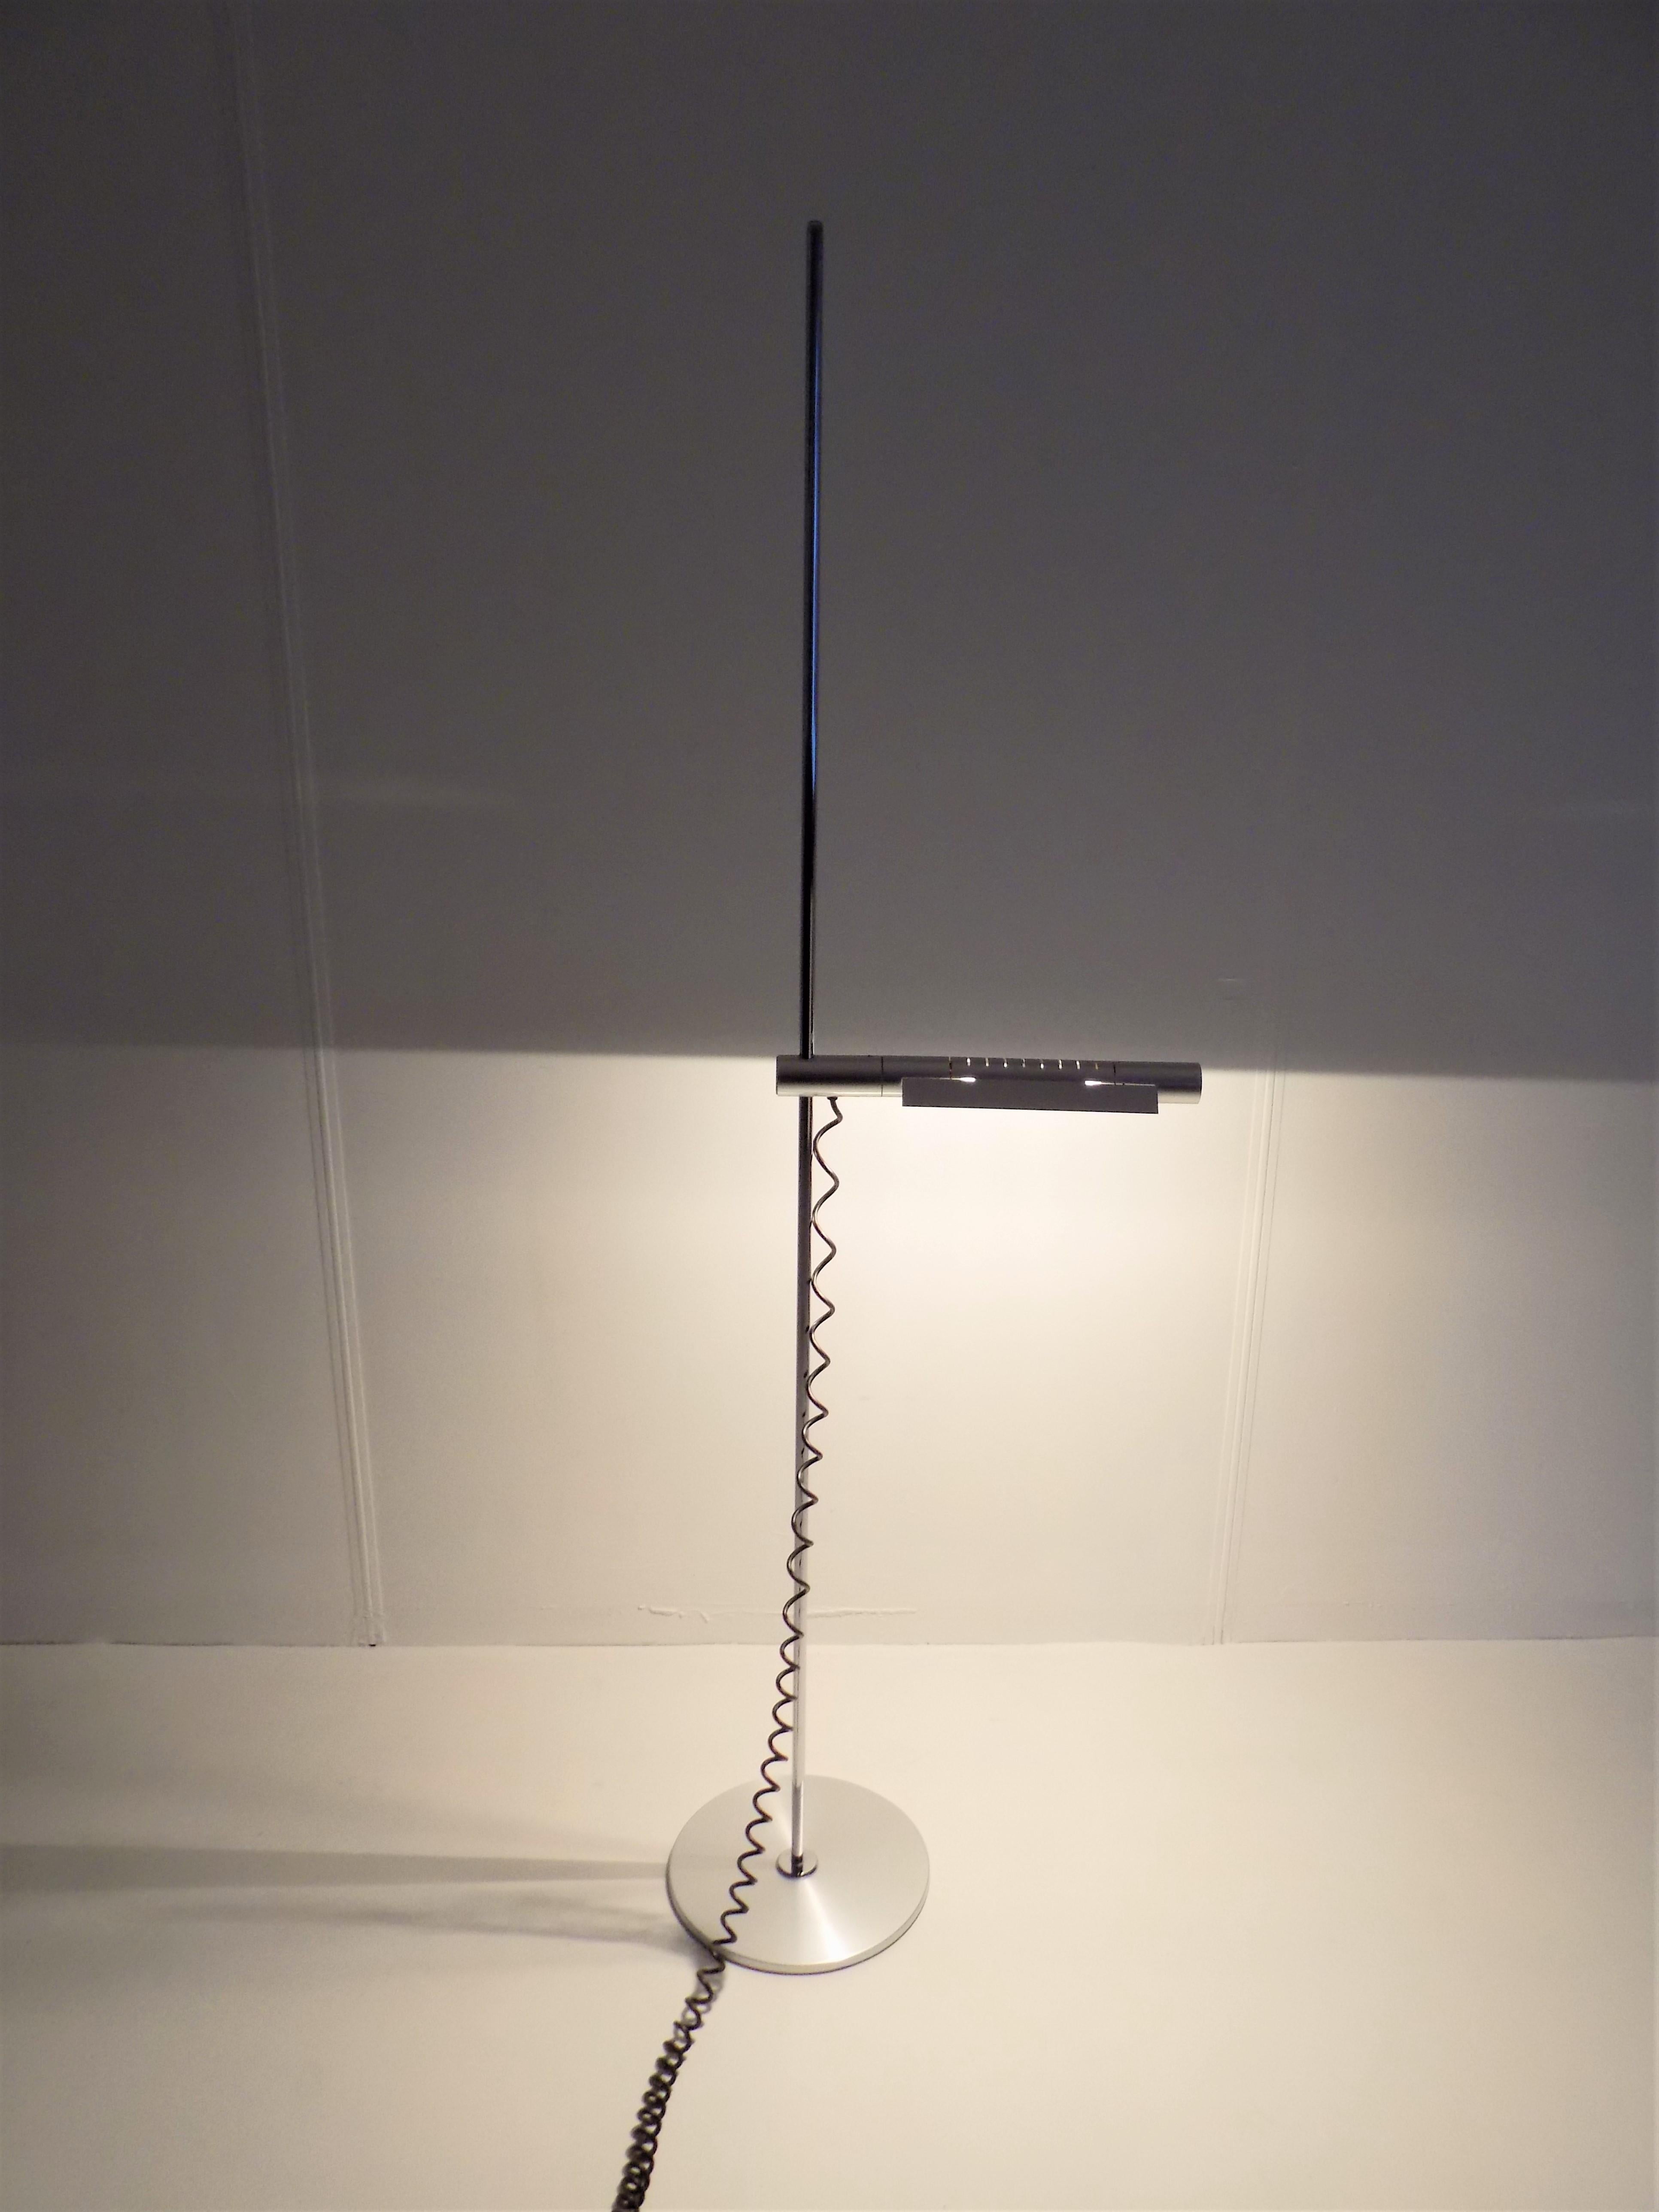 Metal Swisslamps International Halo 250 Floor Lamp by R. and R. Baltensweiler For Sale